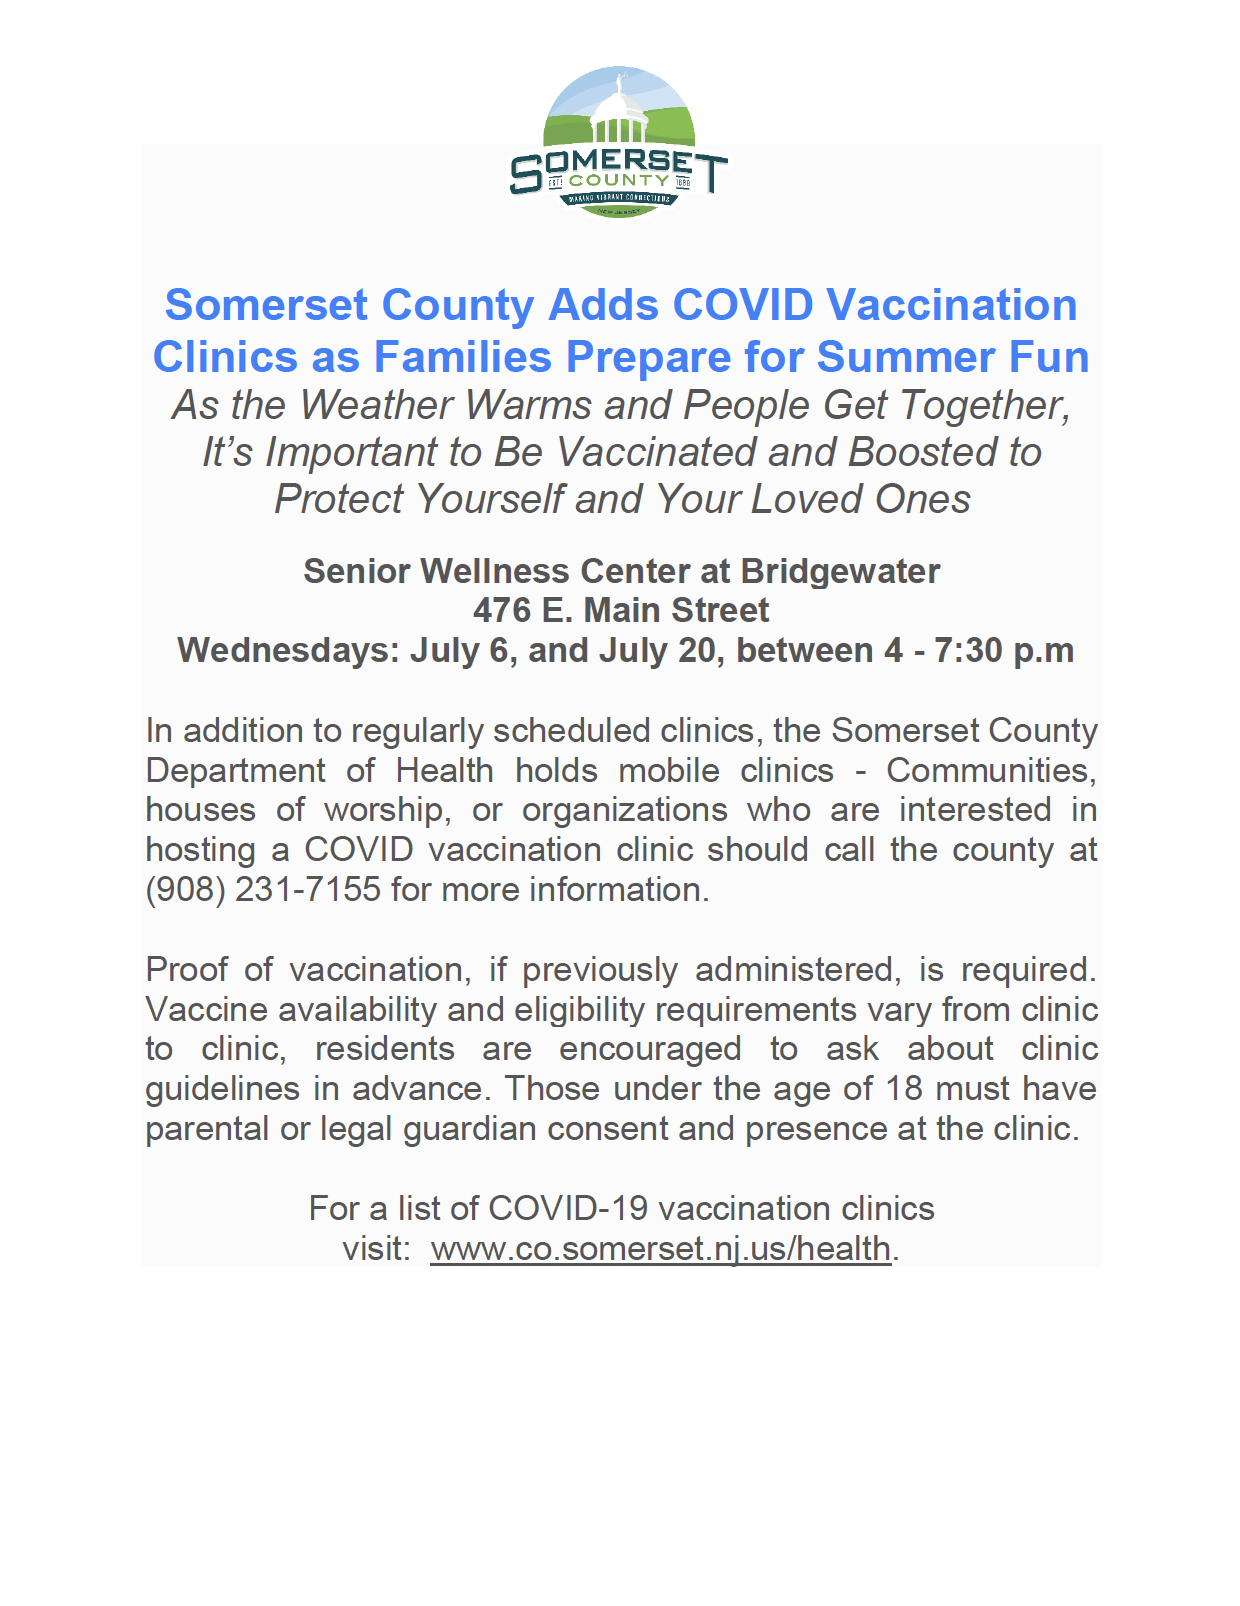 Somerset County COVID Vaccination Clinic flyer